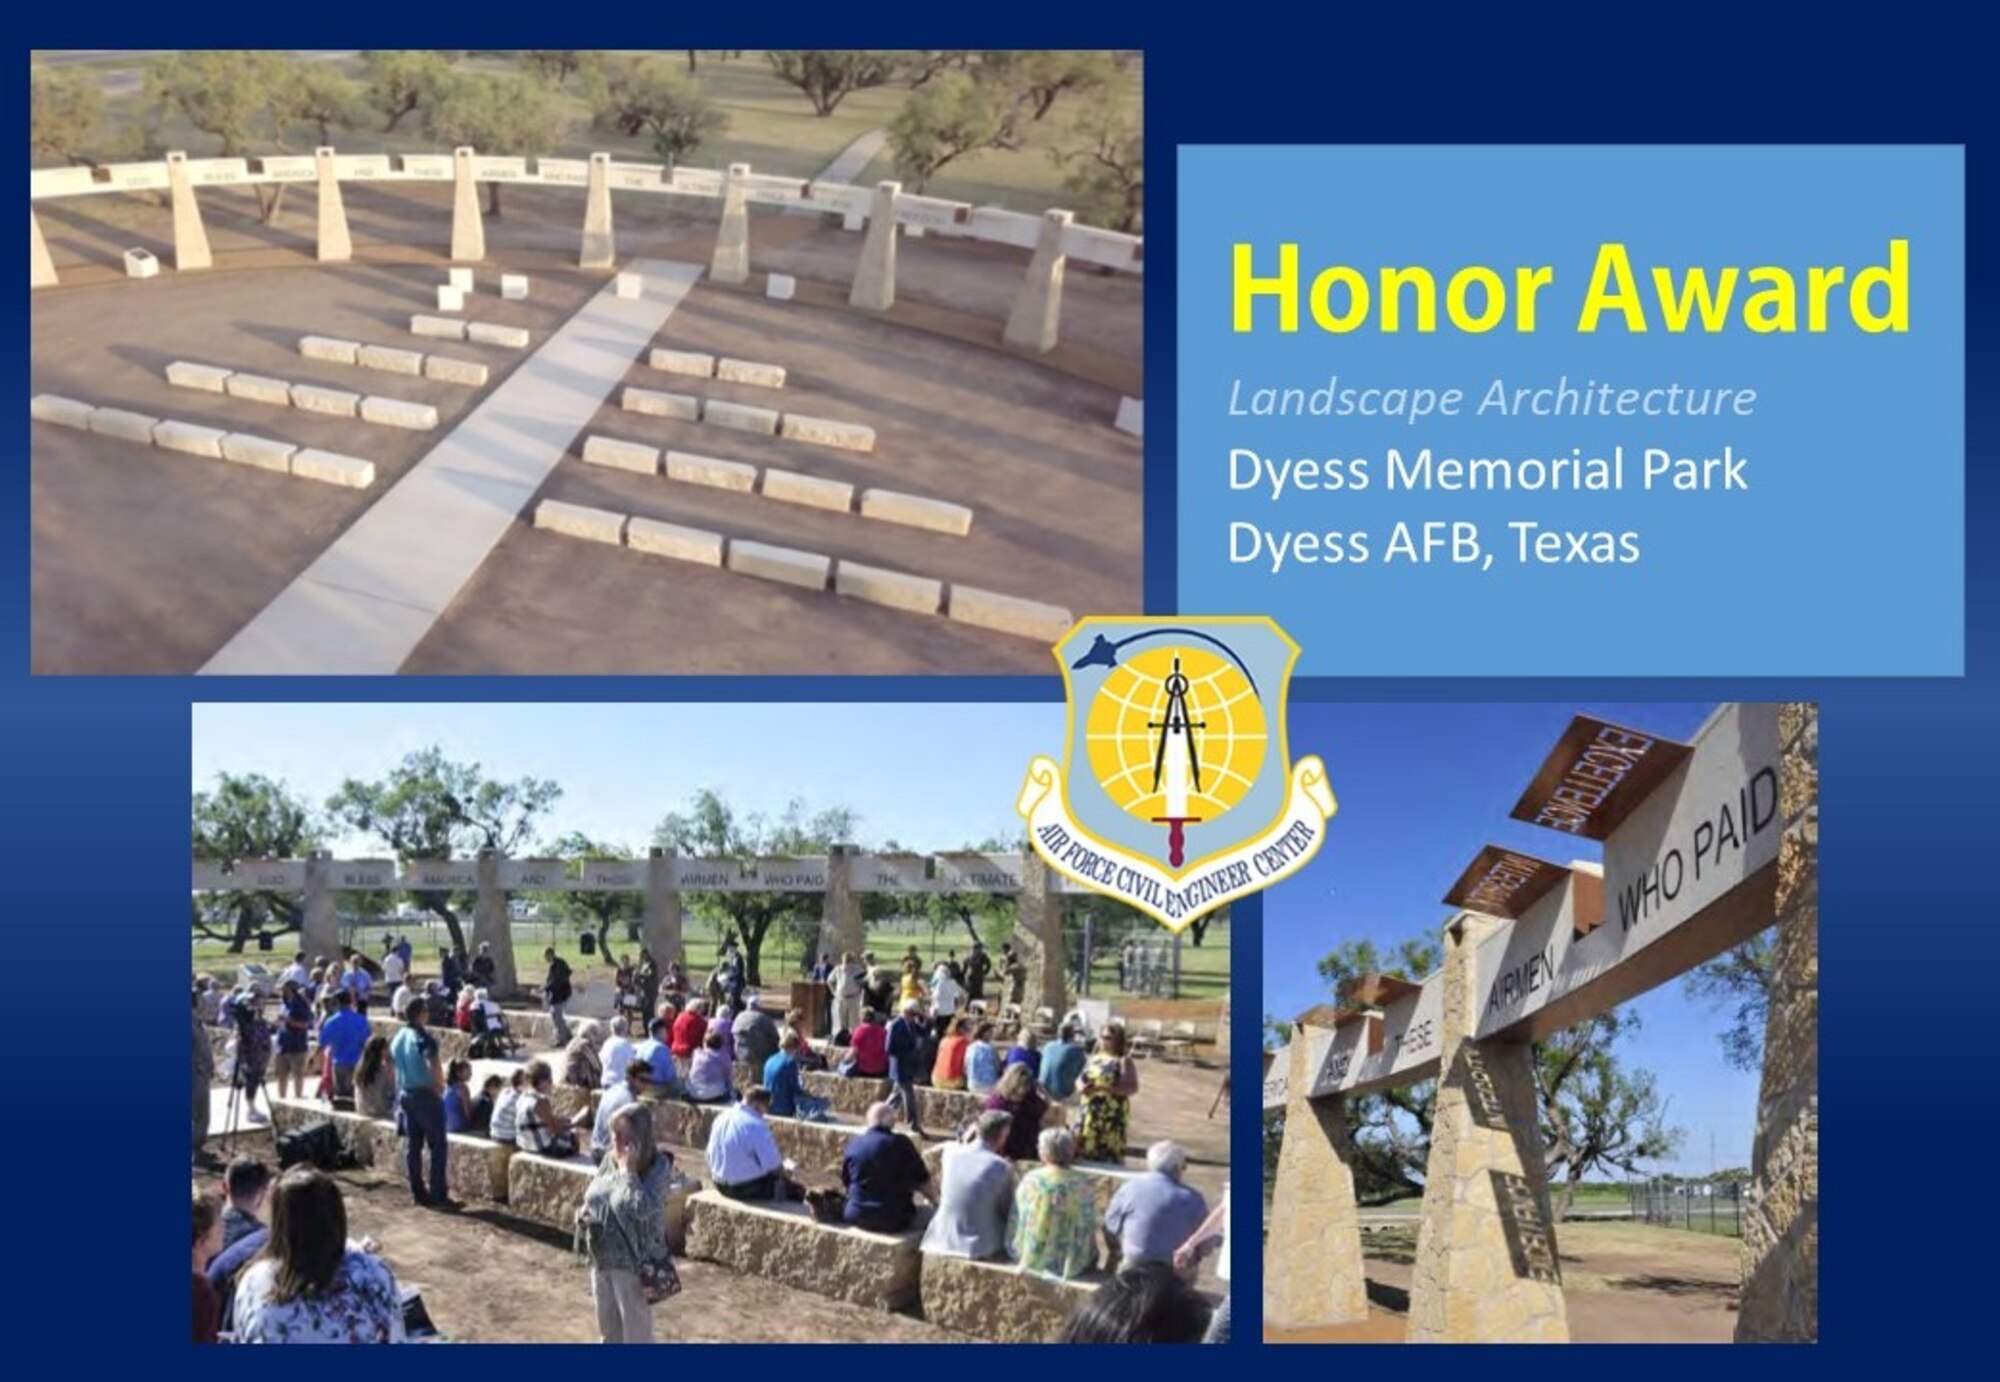 2020 Design Honor Award in the Landscape Architecture category is the Dyess Memorial Park at Dyess AFB, Texas. (U.S. Air Force graphic)